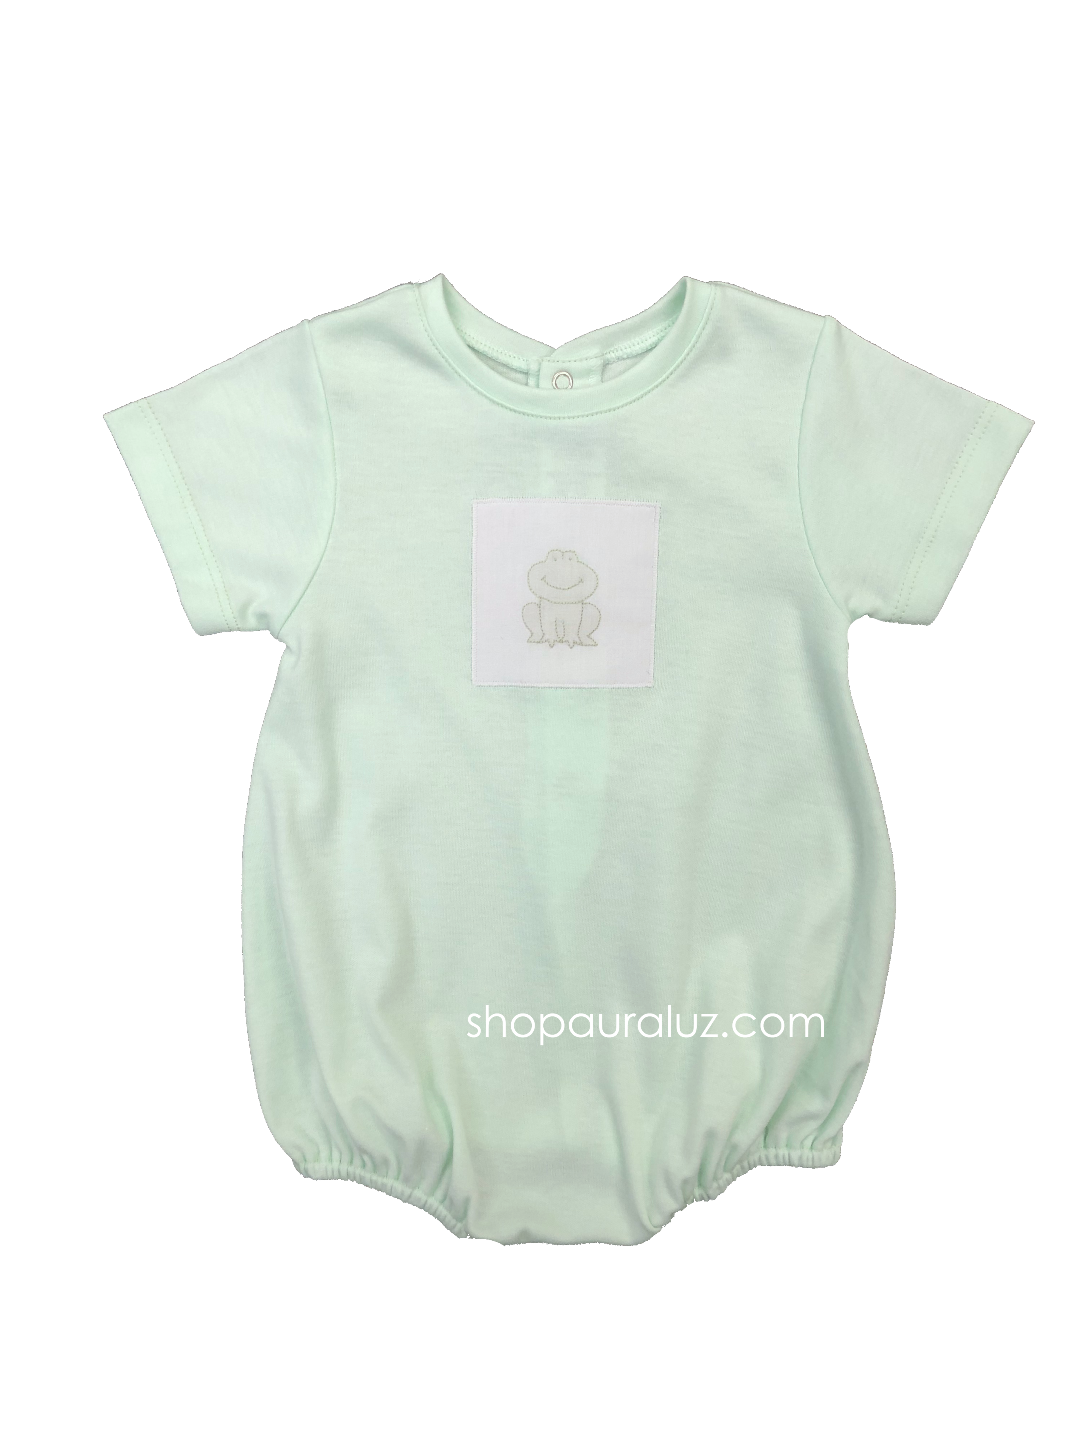 Auraluz Knit Boy Bubble...Green with no collar and embroidered frog. STORE EXCLUSIVE!